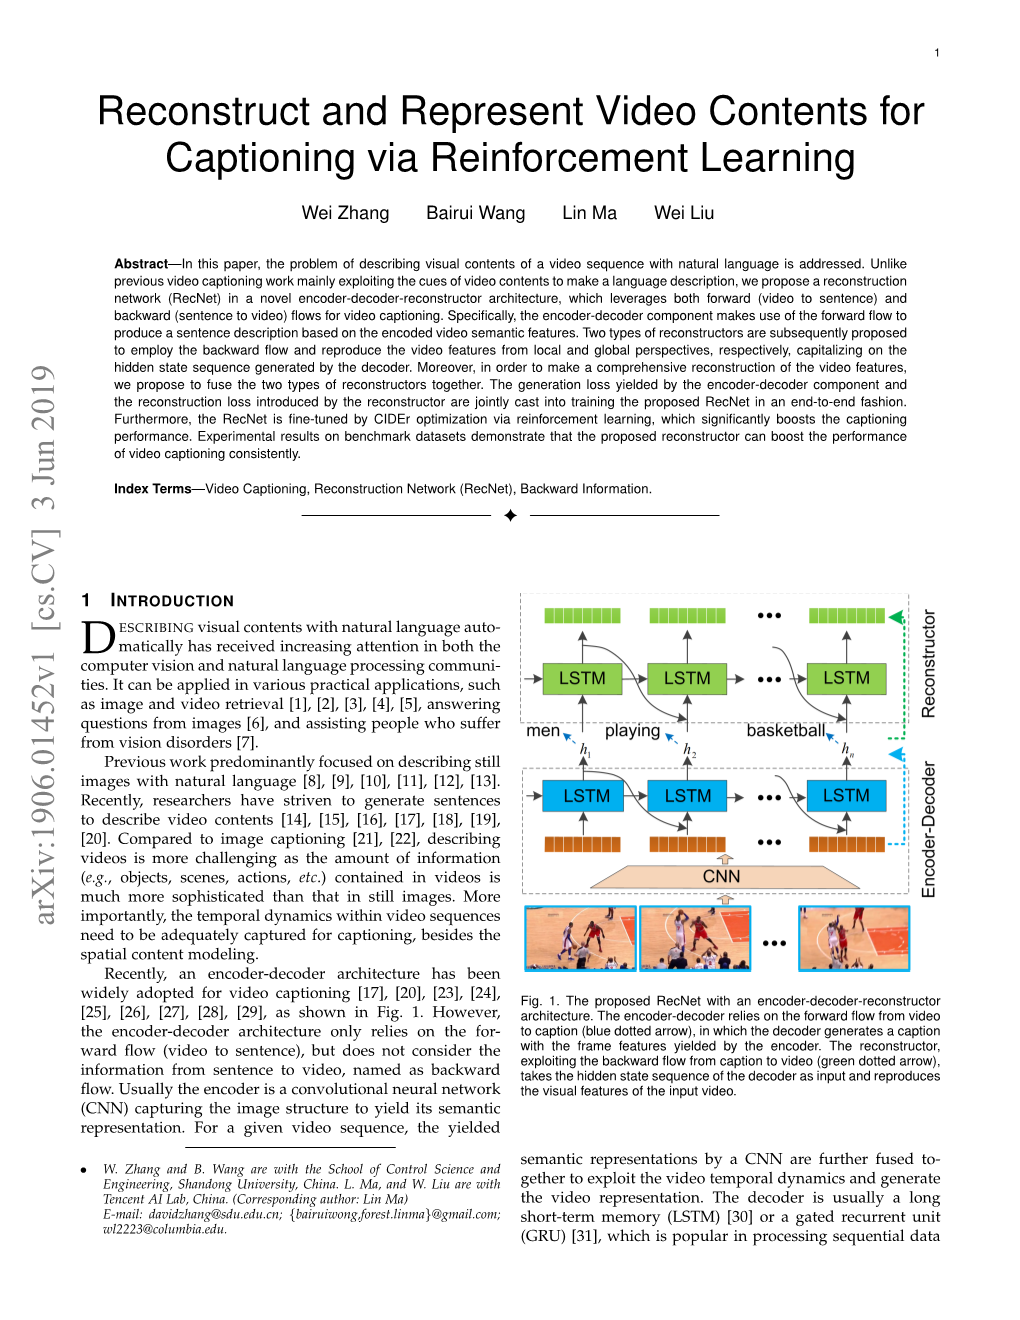 Reconstruct and Represent Video Contents for Captioning Via Reinforcement Learning